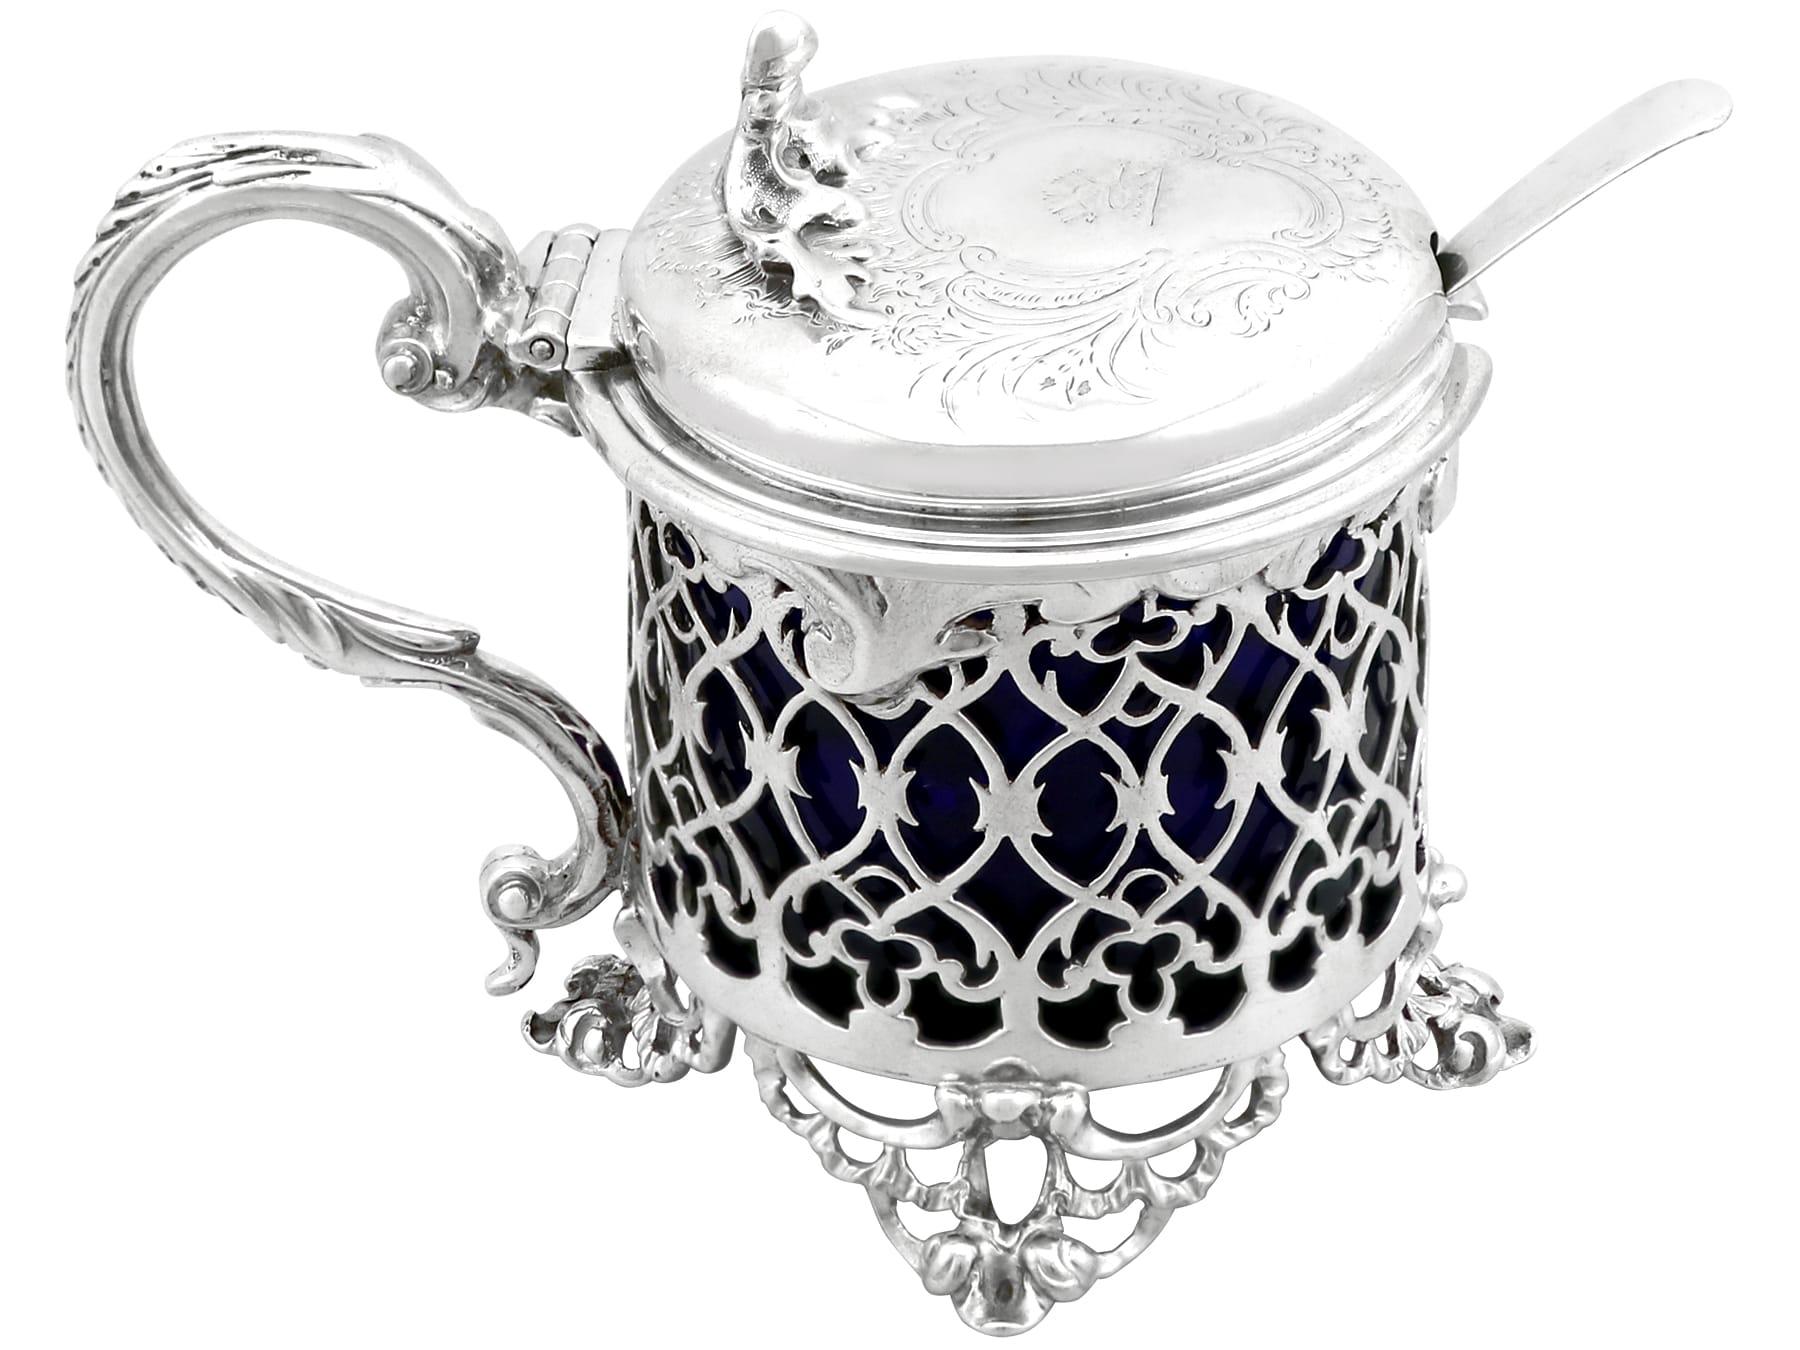 An exceptional, fine and impressive, large antique Victorian English sterling silver mustard pot; an addition to our 19th century silver cruets/condiments collection.

This exceptional and large antique Victorian sterling silver mustard pot has a